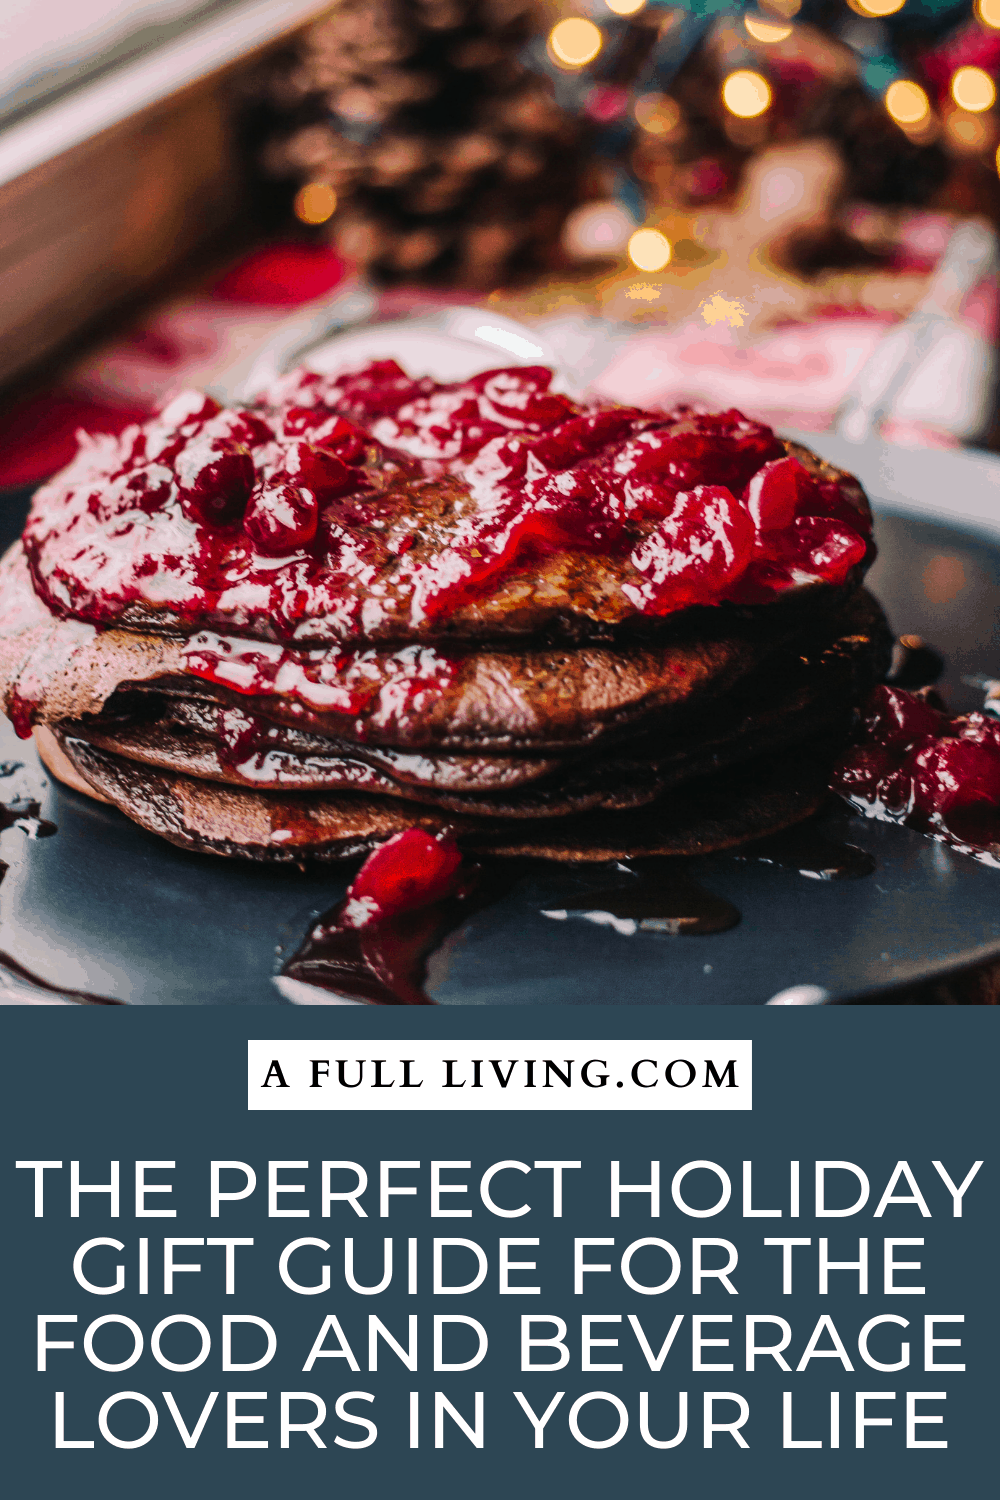 stack of chocolate pancakes with cherry topping twinkling holiday lights in the background with text he Perfect Holiday Gift Guide for the Food and Beverage Lovers in Your Life